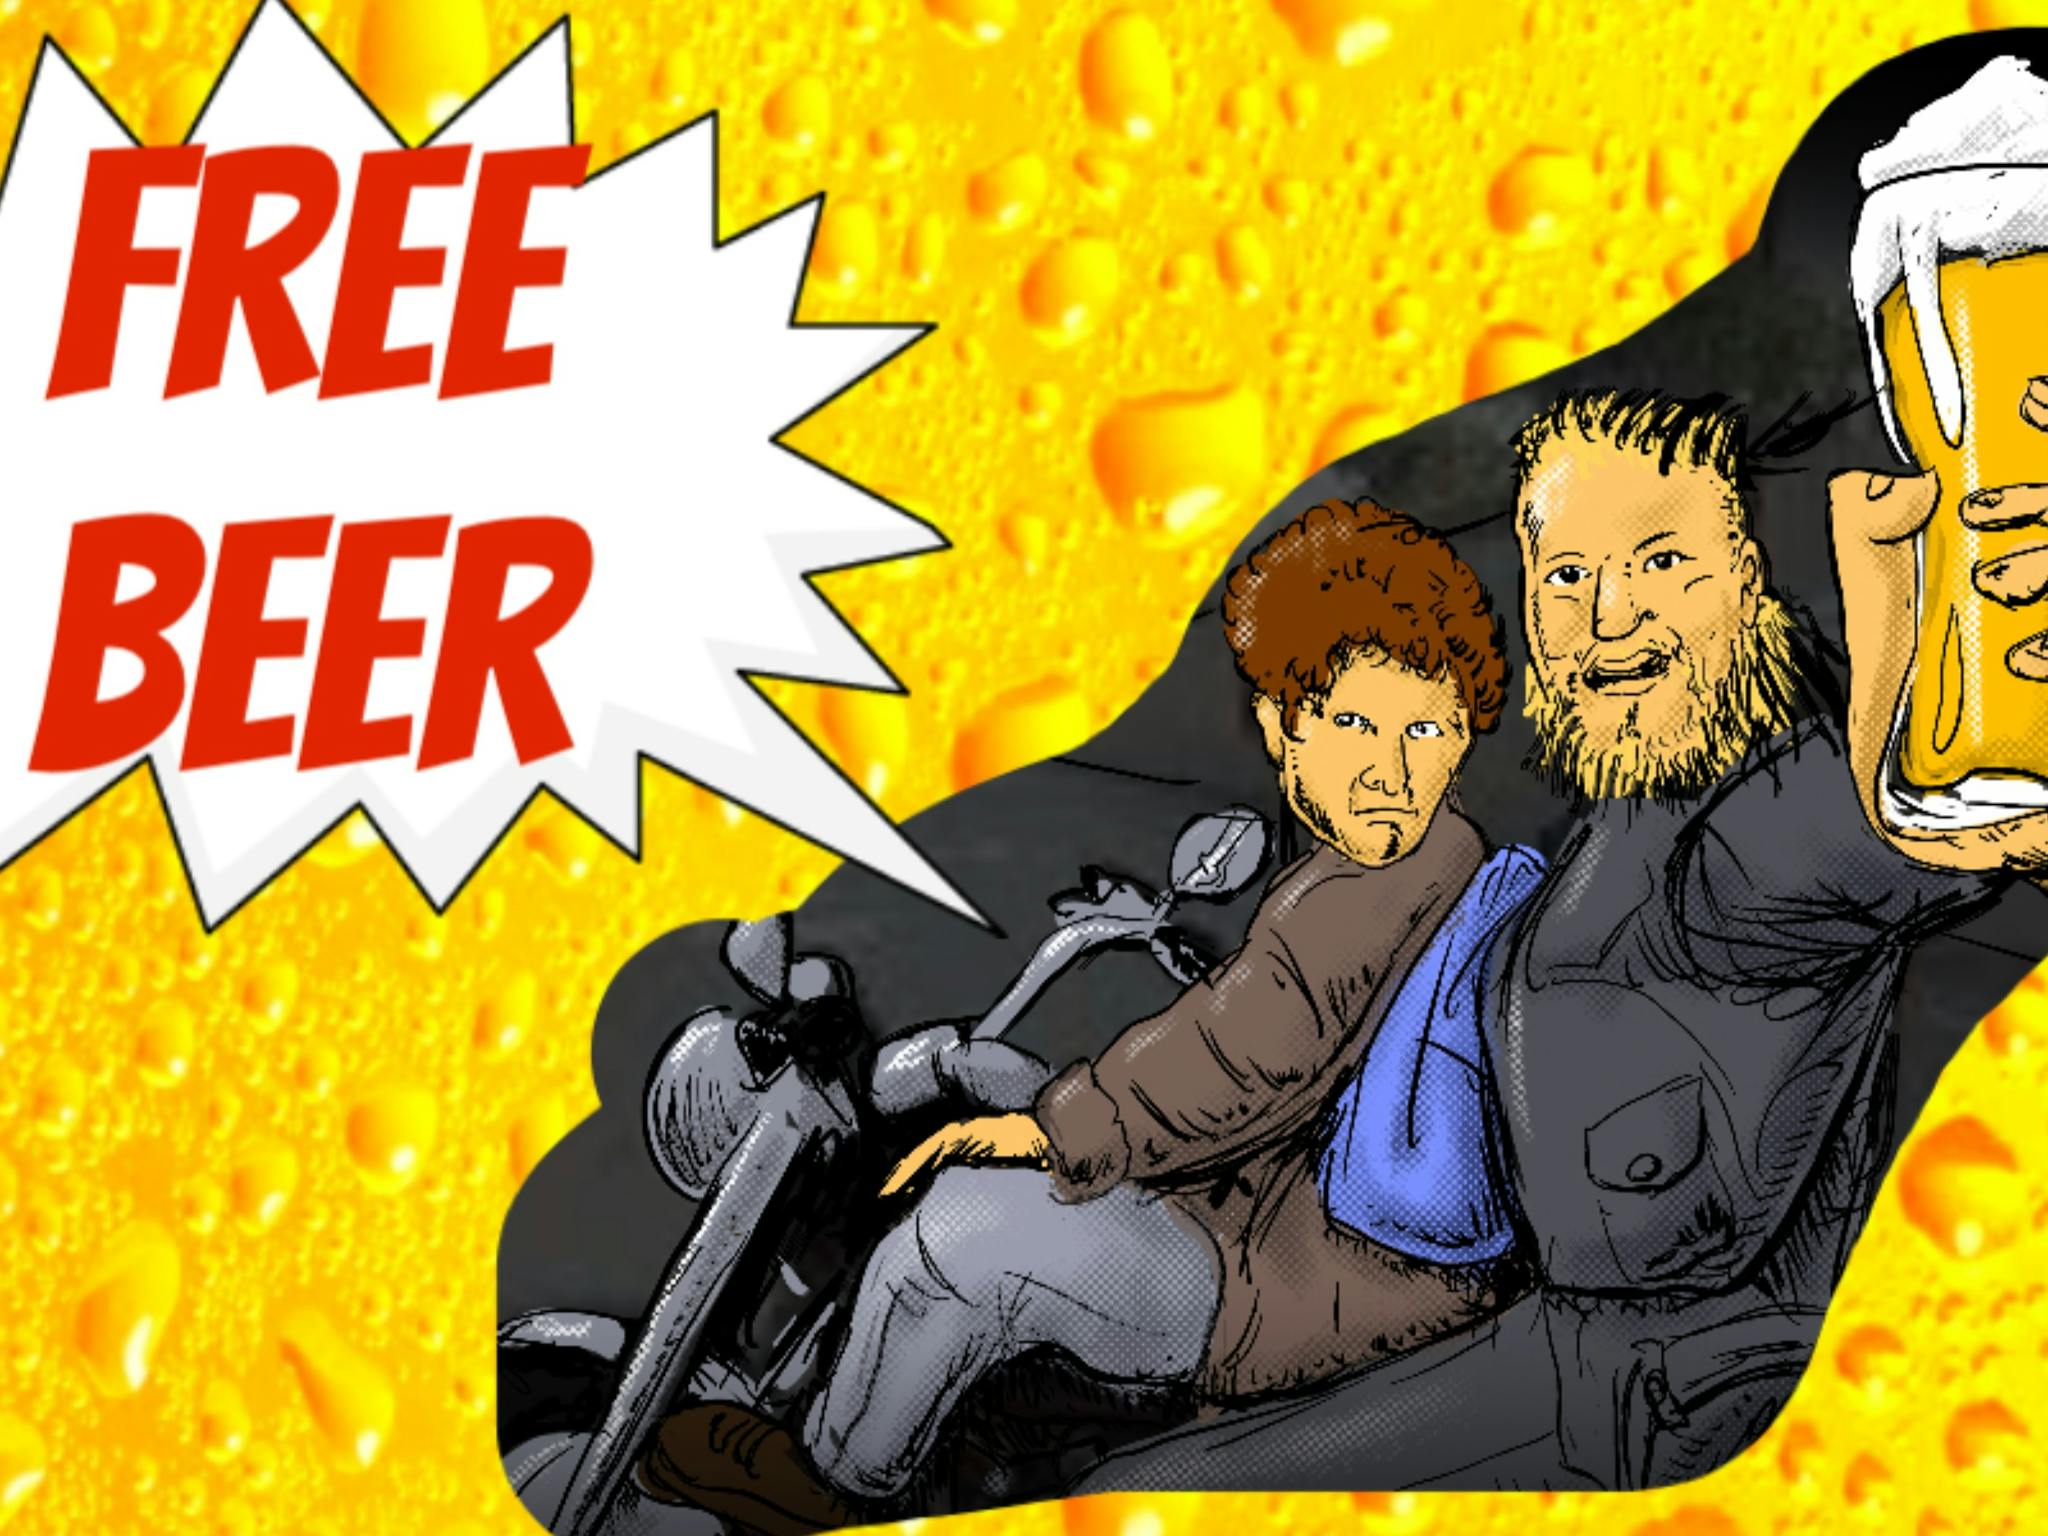 Image is of a cartoon Nick and Brett. They are holding a beer and riding a motorbike.